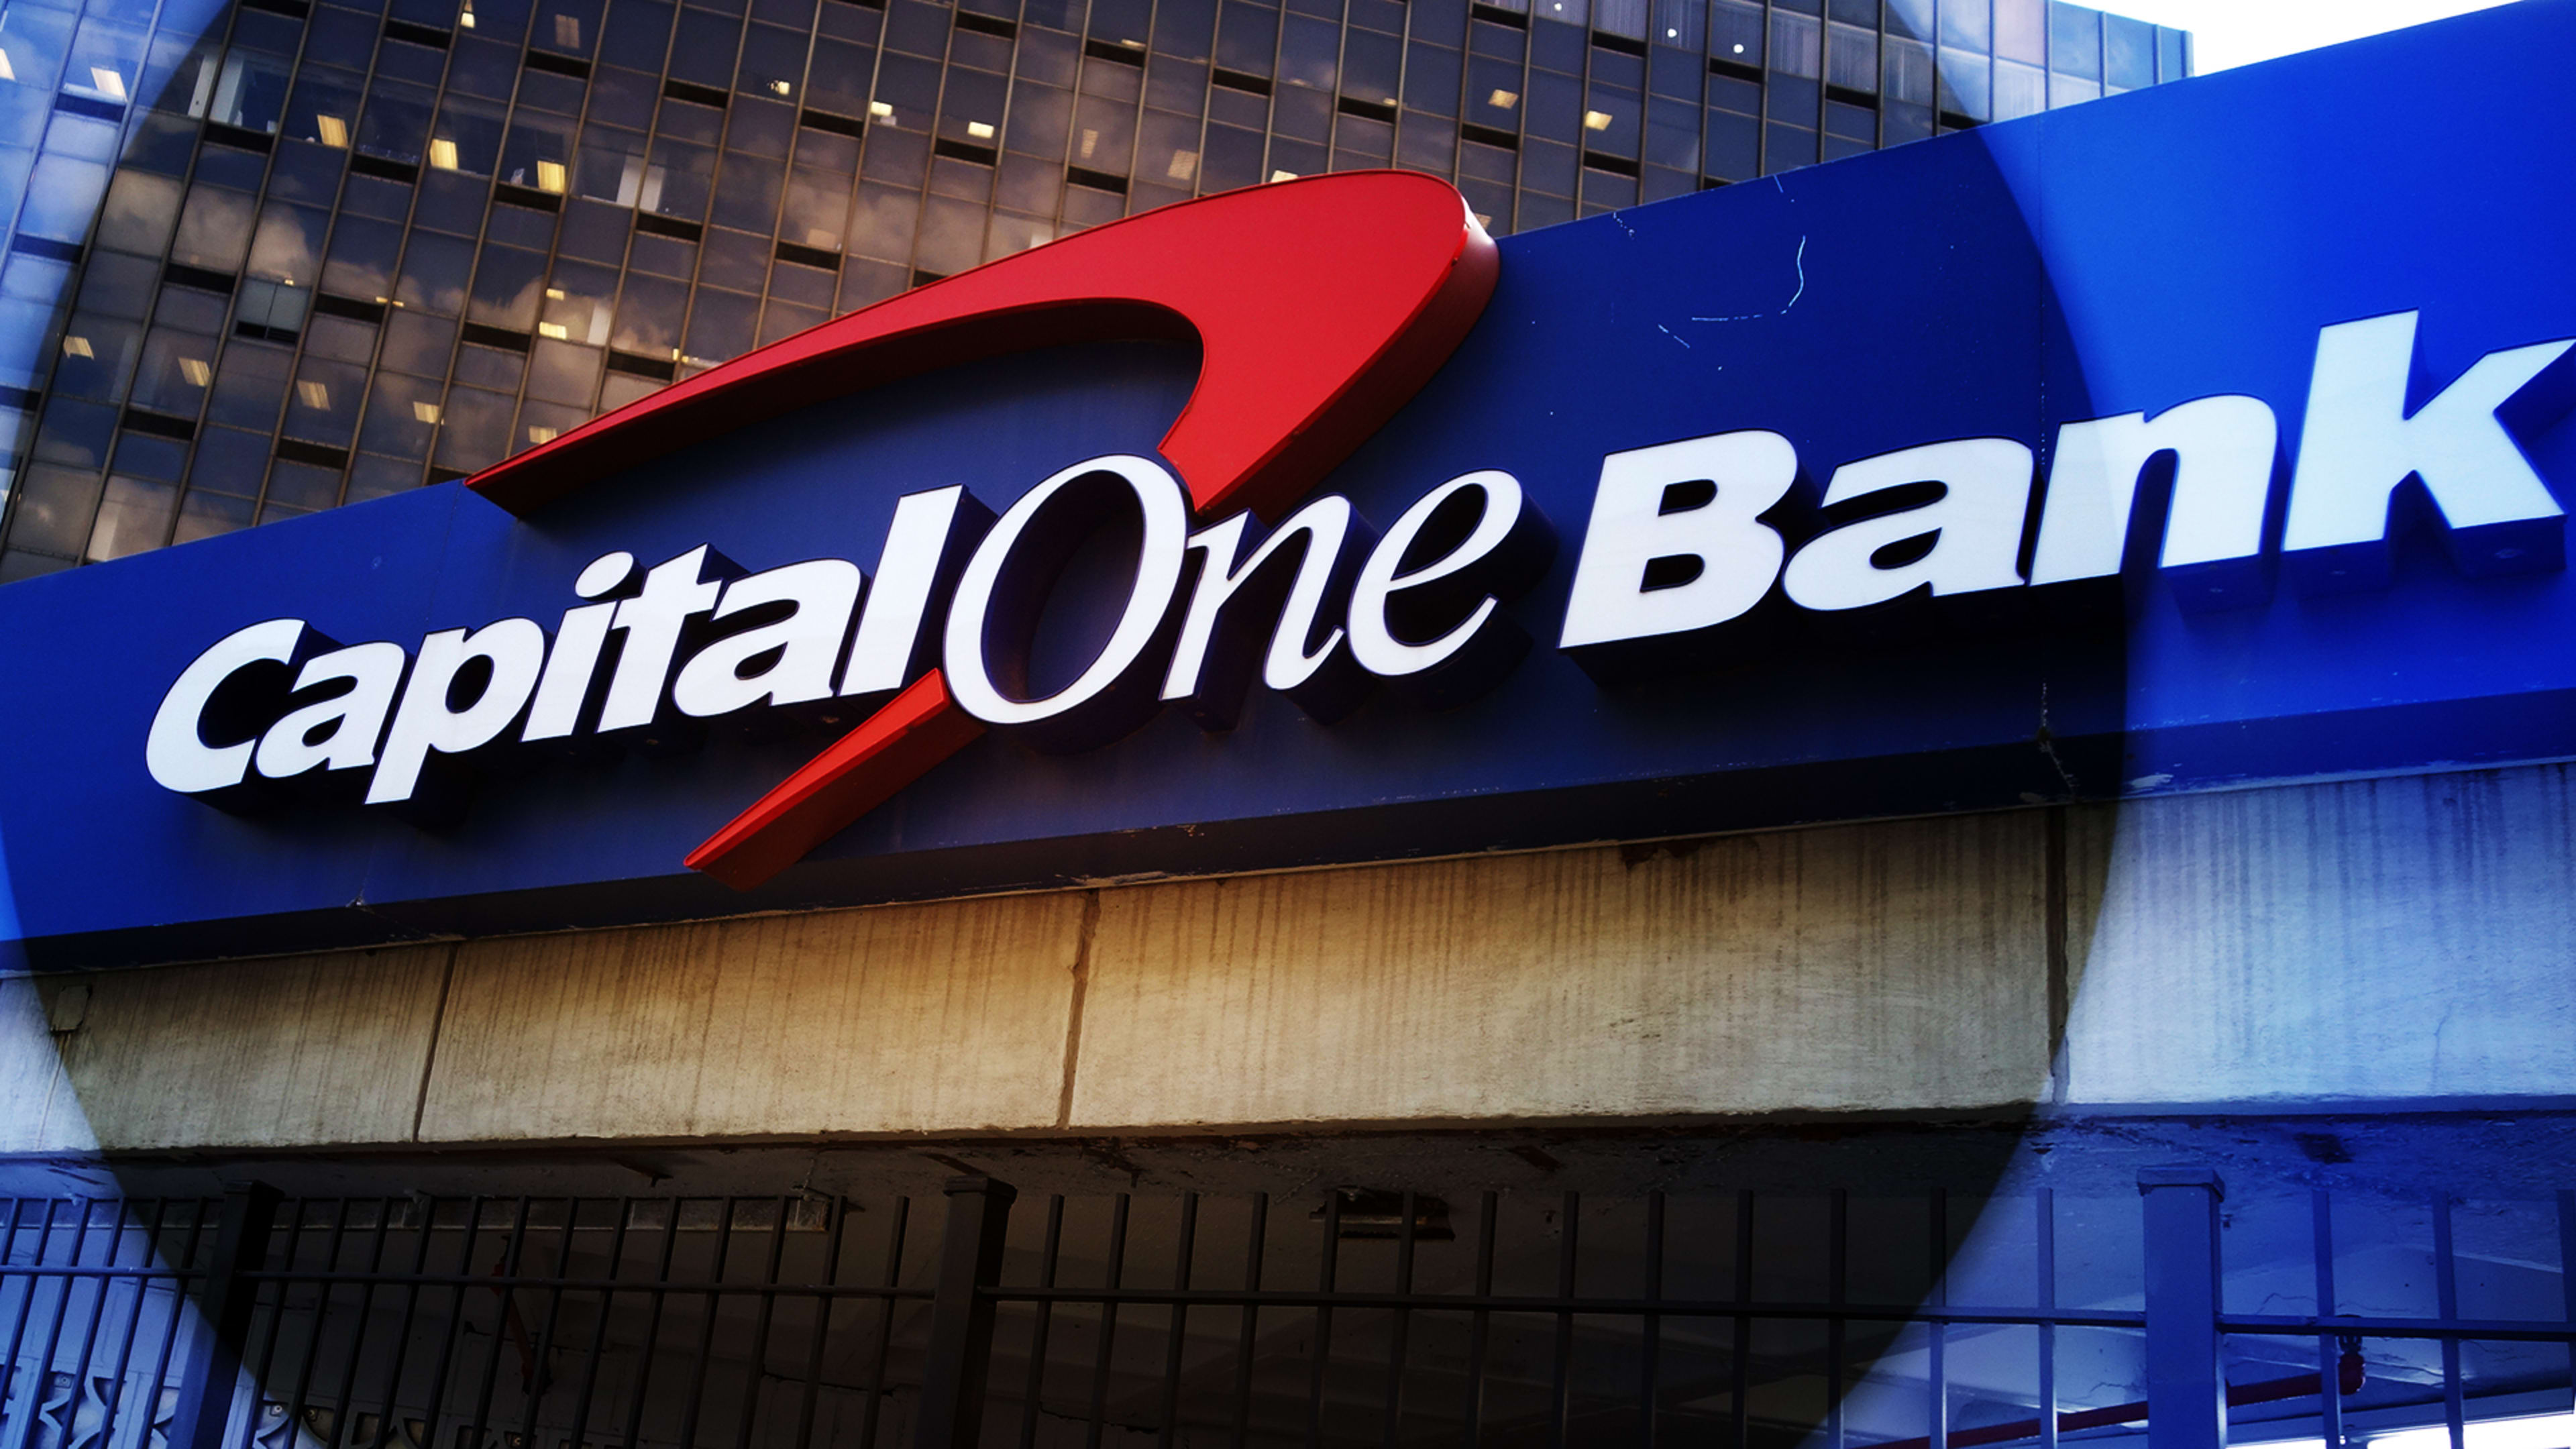 Everything we know about the alleged Capital One hacker